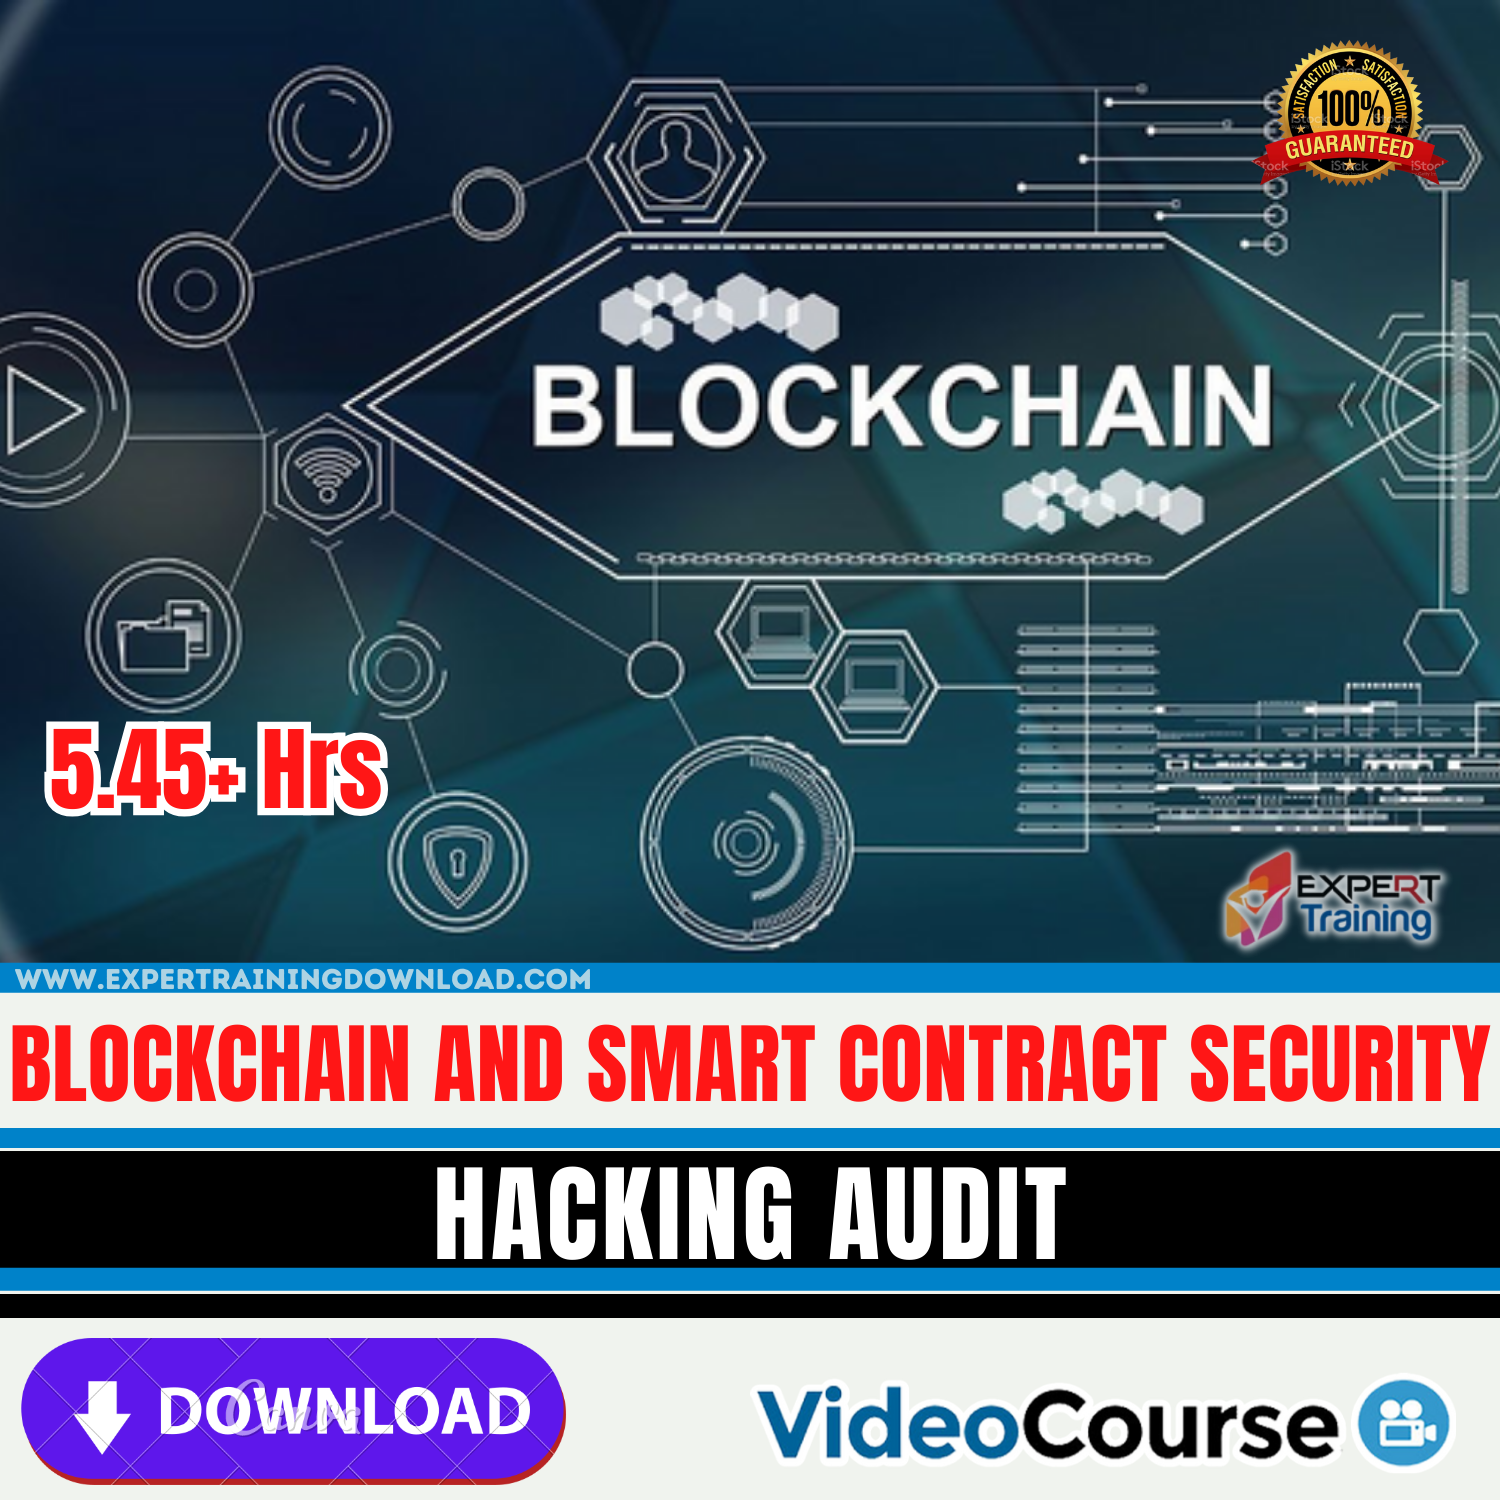 Blockchain and Smart Contract Security Hacking Audit